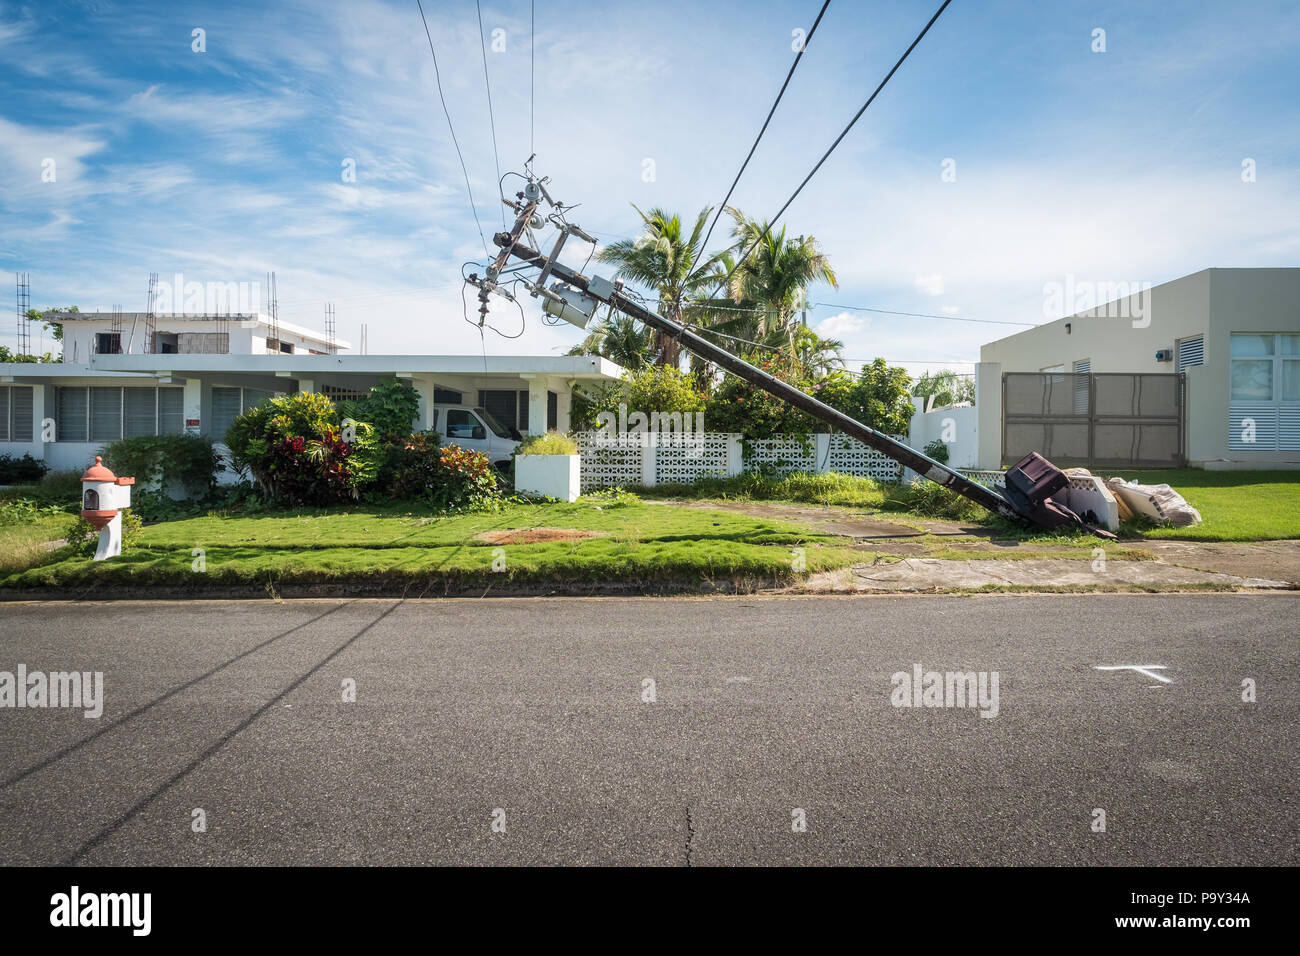 A telephone pole leans dangerously close to a house in Puerto Rico after Hurricane Maria destroyed much of the island's infrastructure in 2017. Stock Photo